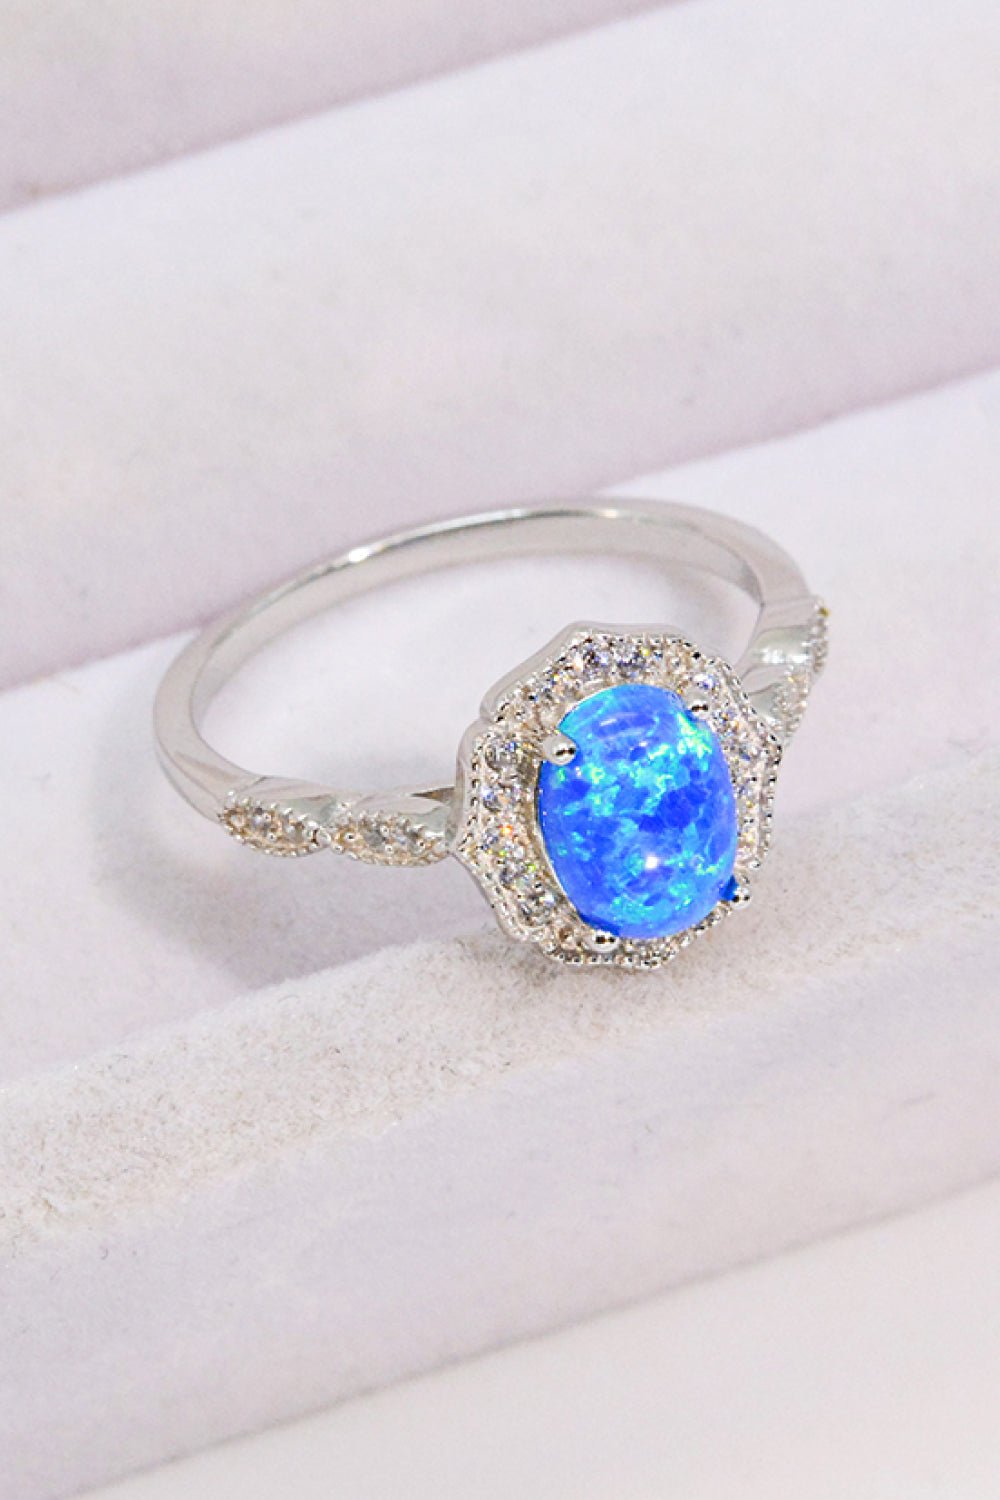 "Enchanted Love - Let the Opal and Zircon 925 Sterling Silver Ring be the Symbol of Your Everlasting Romance" - Guy Christopher